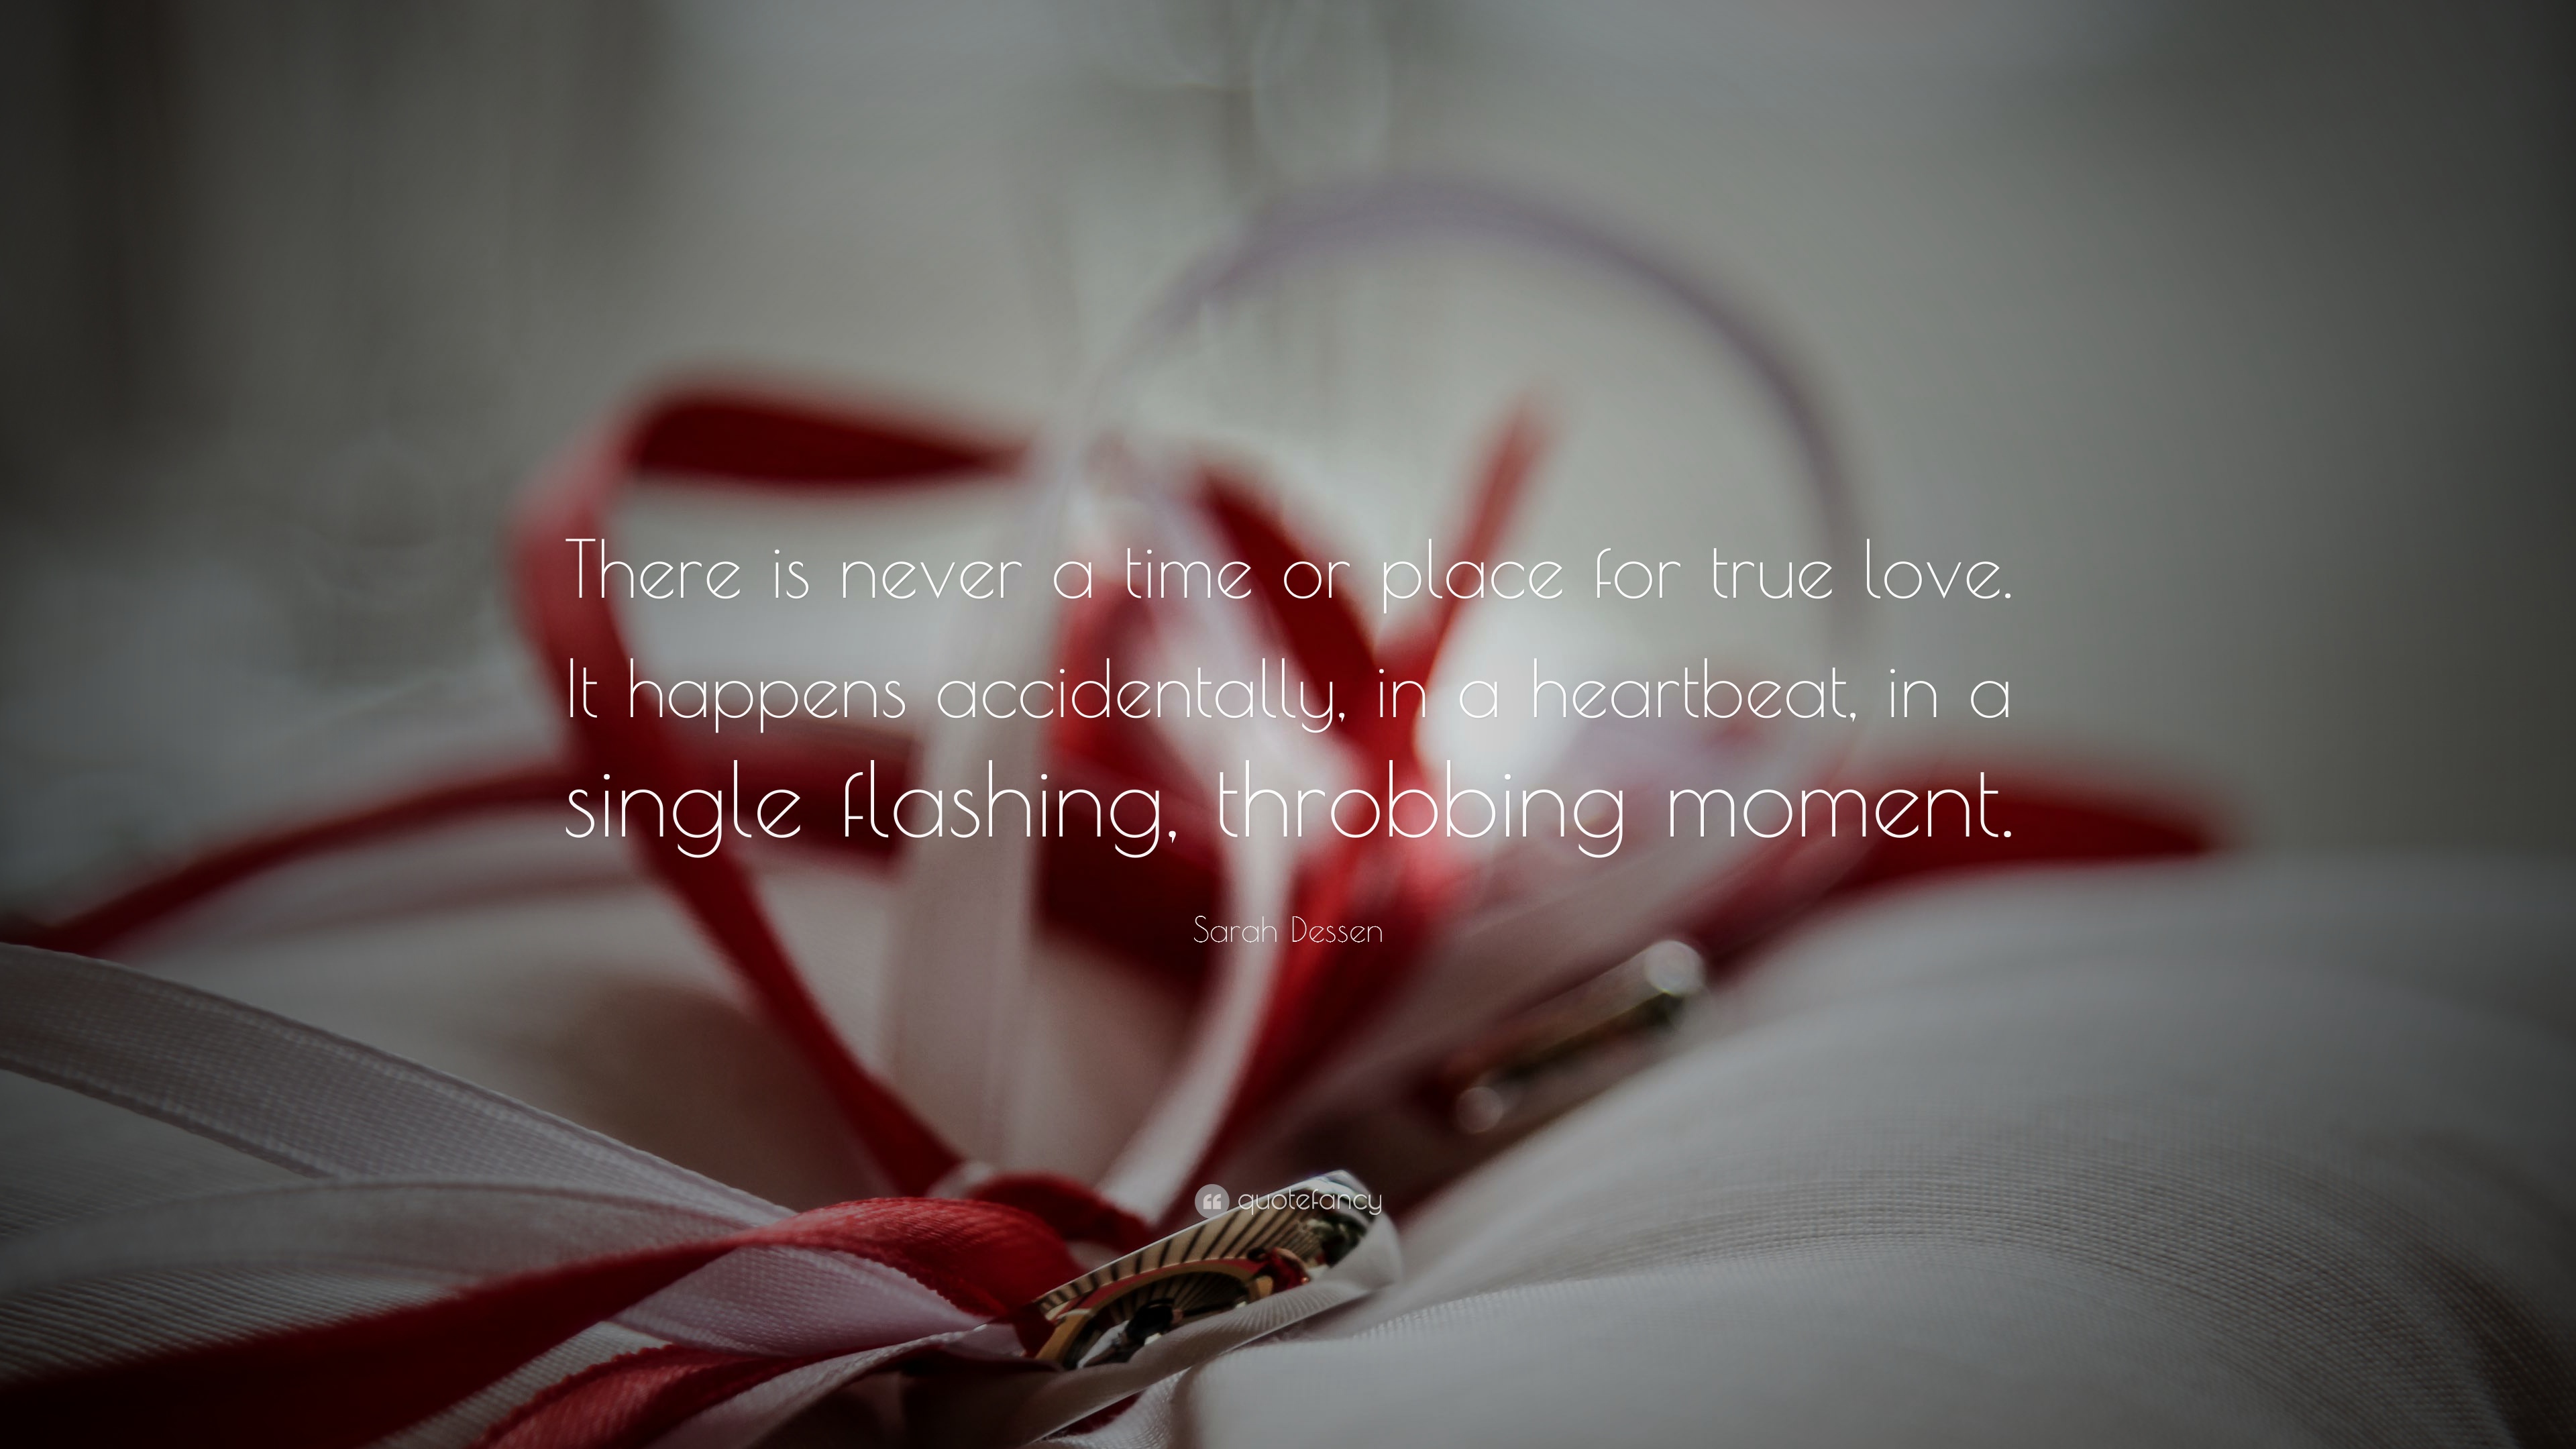 Sarah Dessen Quote - Quotes For Would Be Husband - HD Wallpaper 